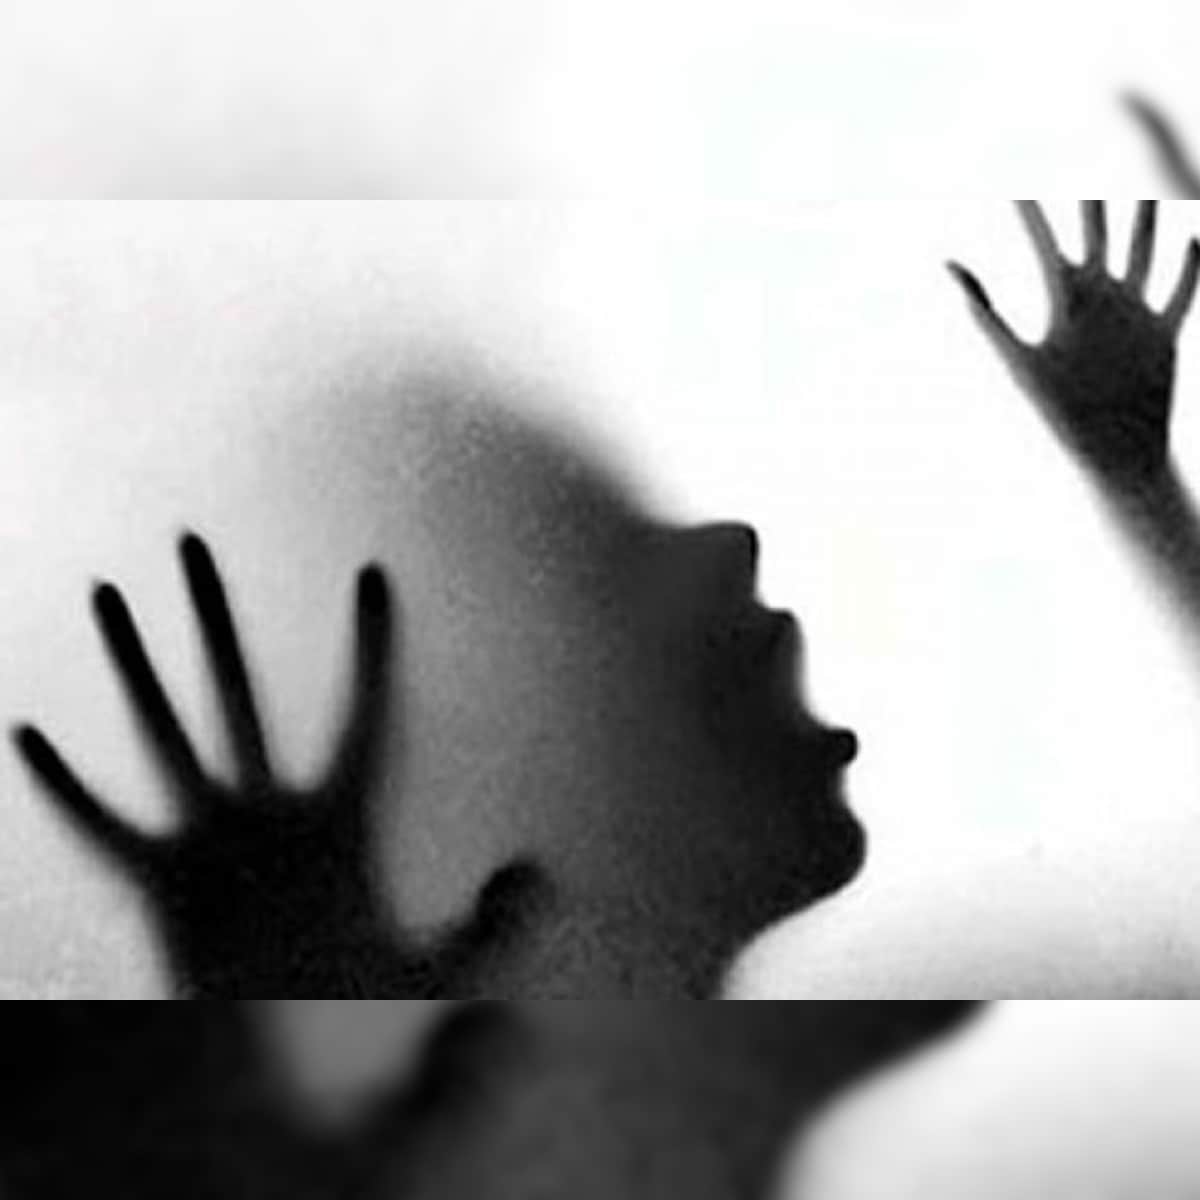 Marathi Girl Hot Sex - 10-year-old Boy Injured After Minor Girl Forces Sex in Kanpur